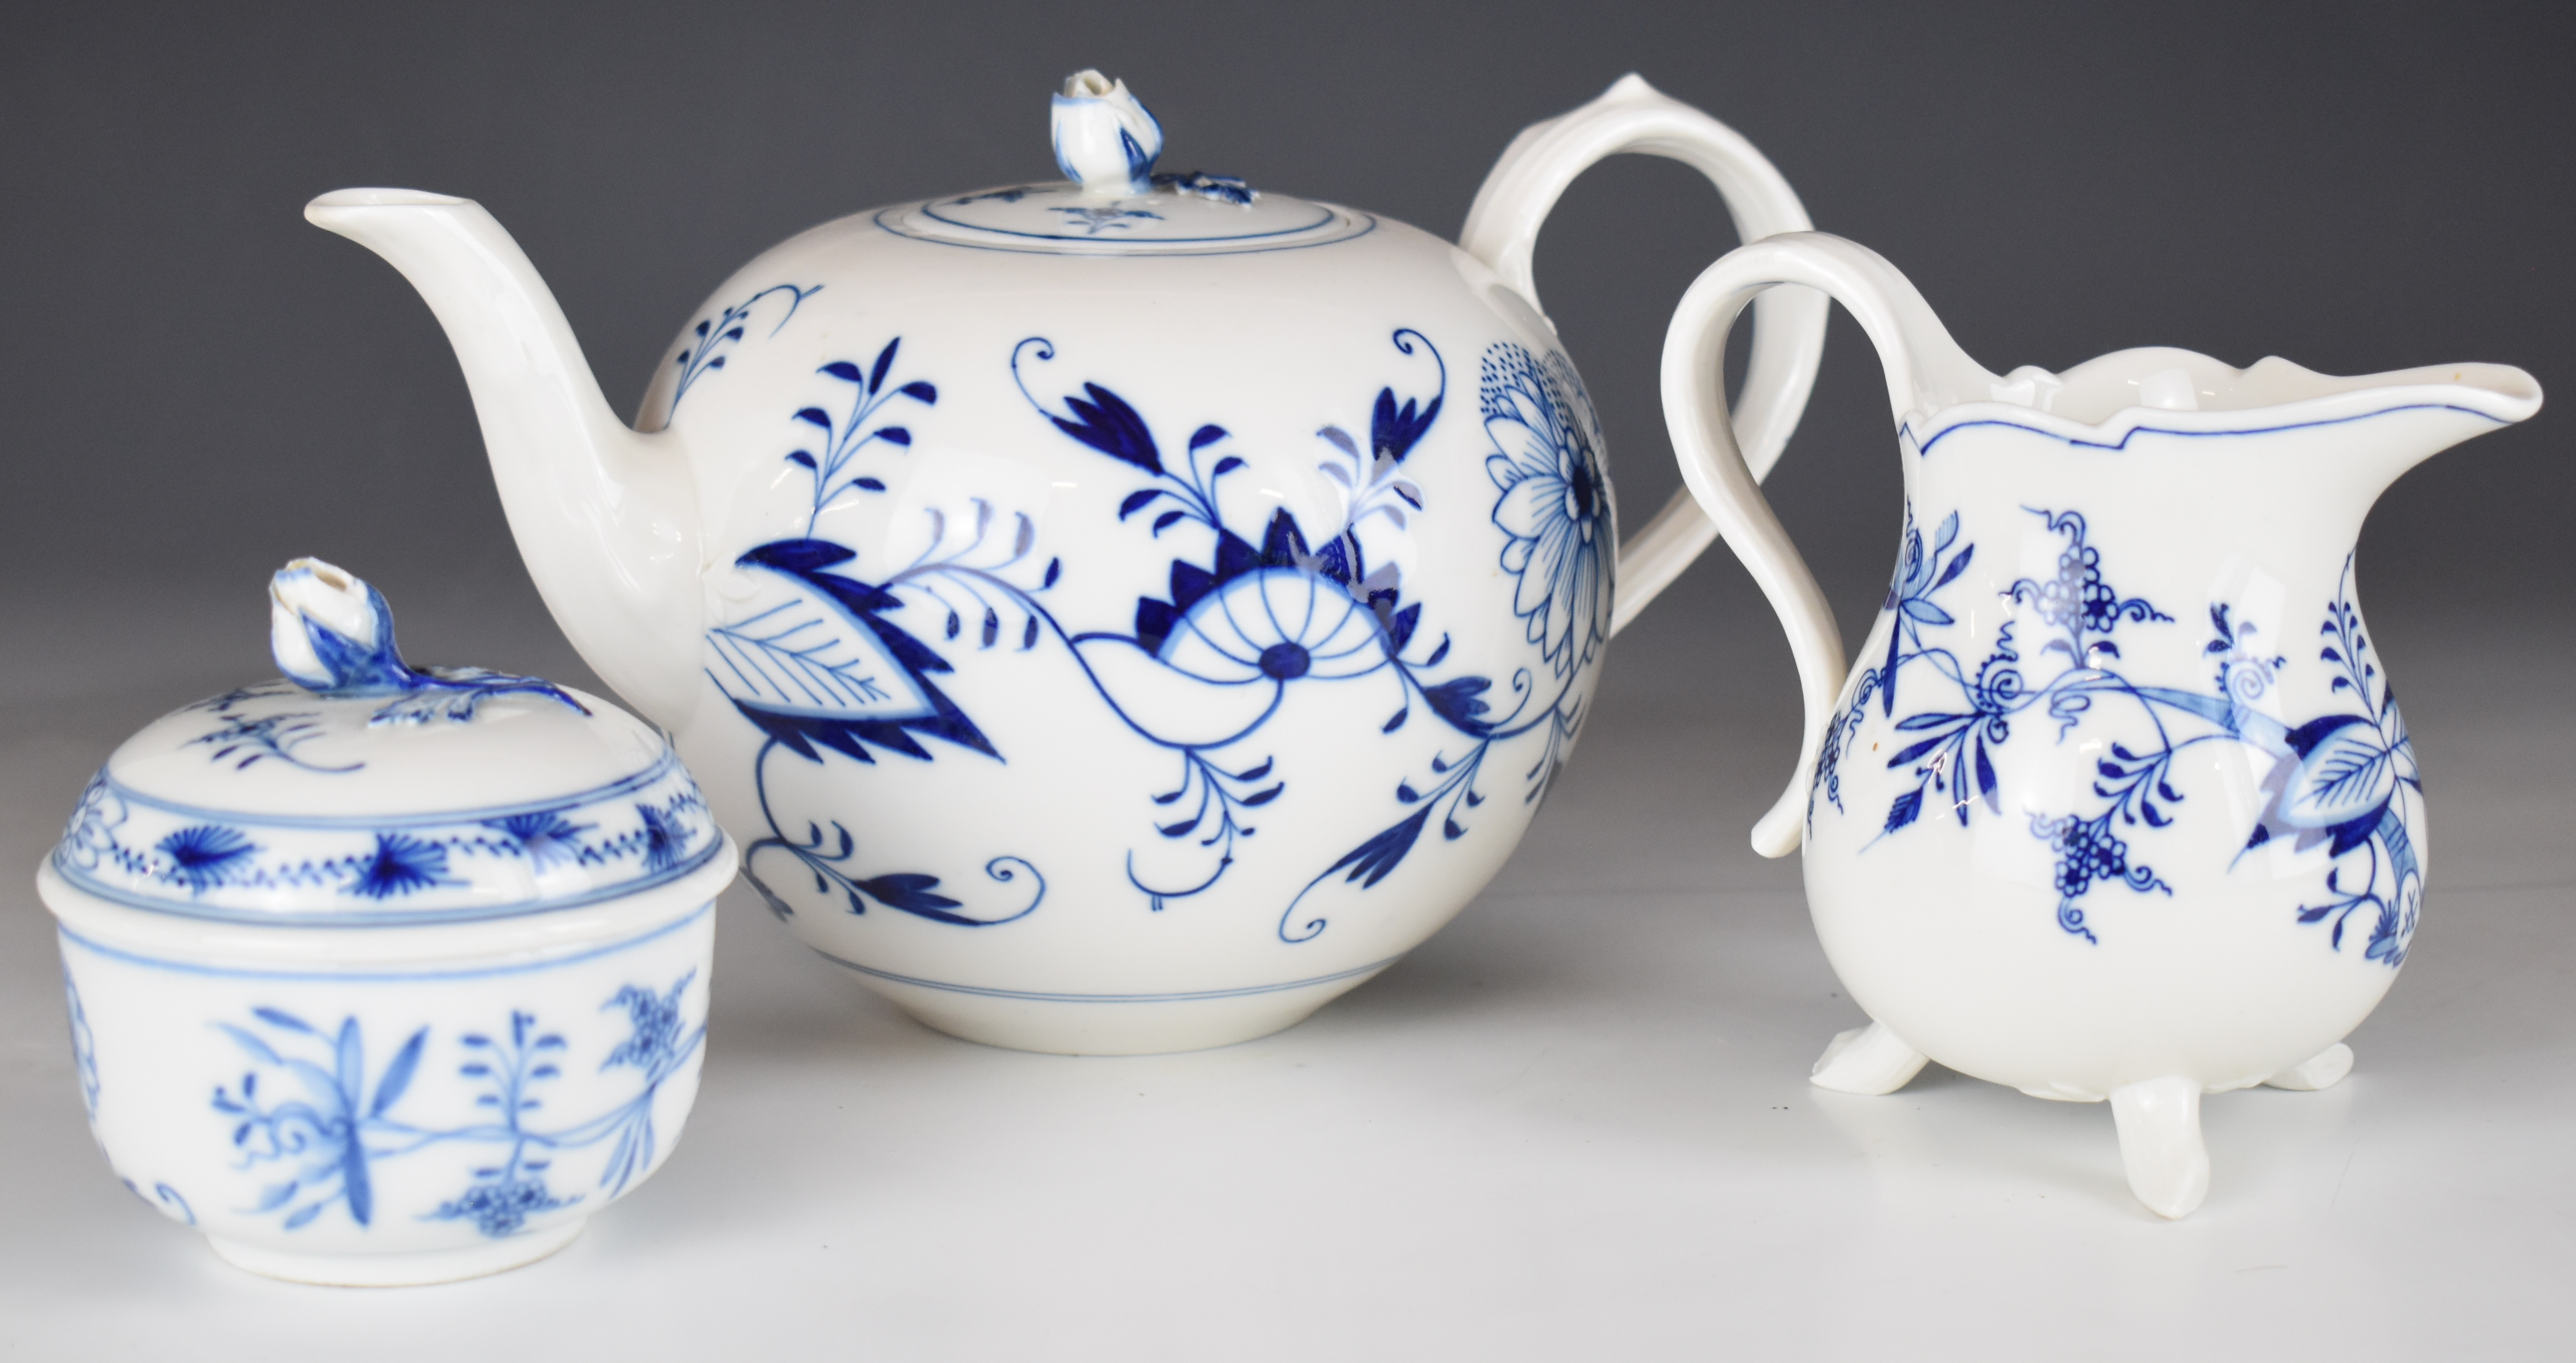 Meissen blue and white porcelain teapot, cream jug and covered sucrier, tallest 20cm